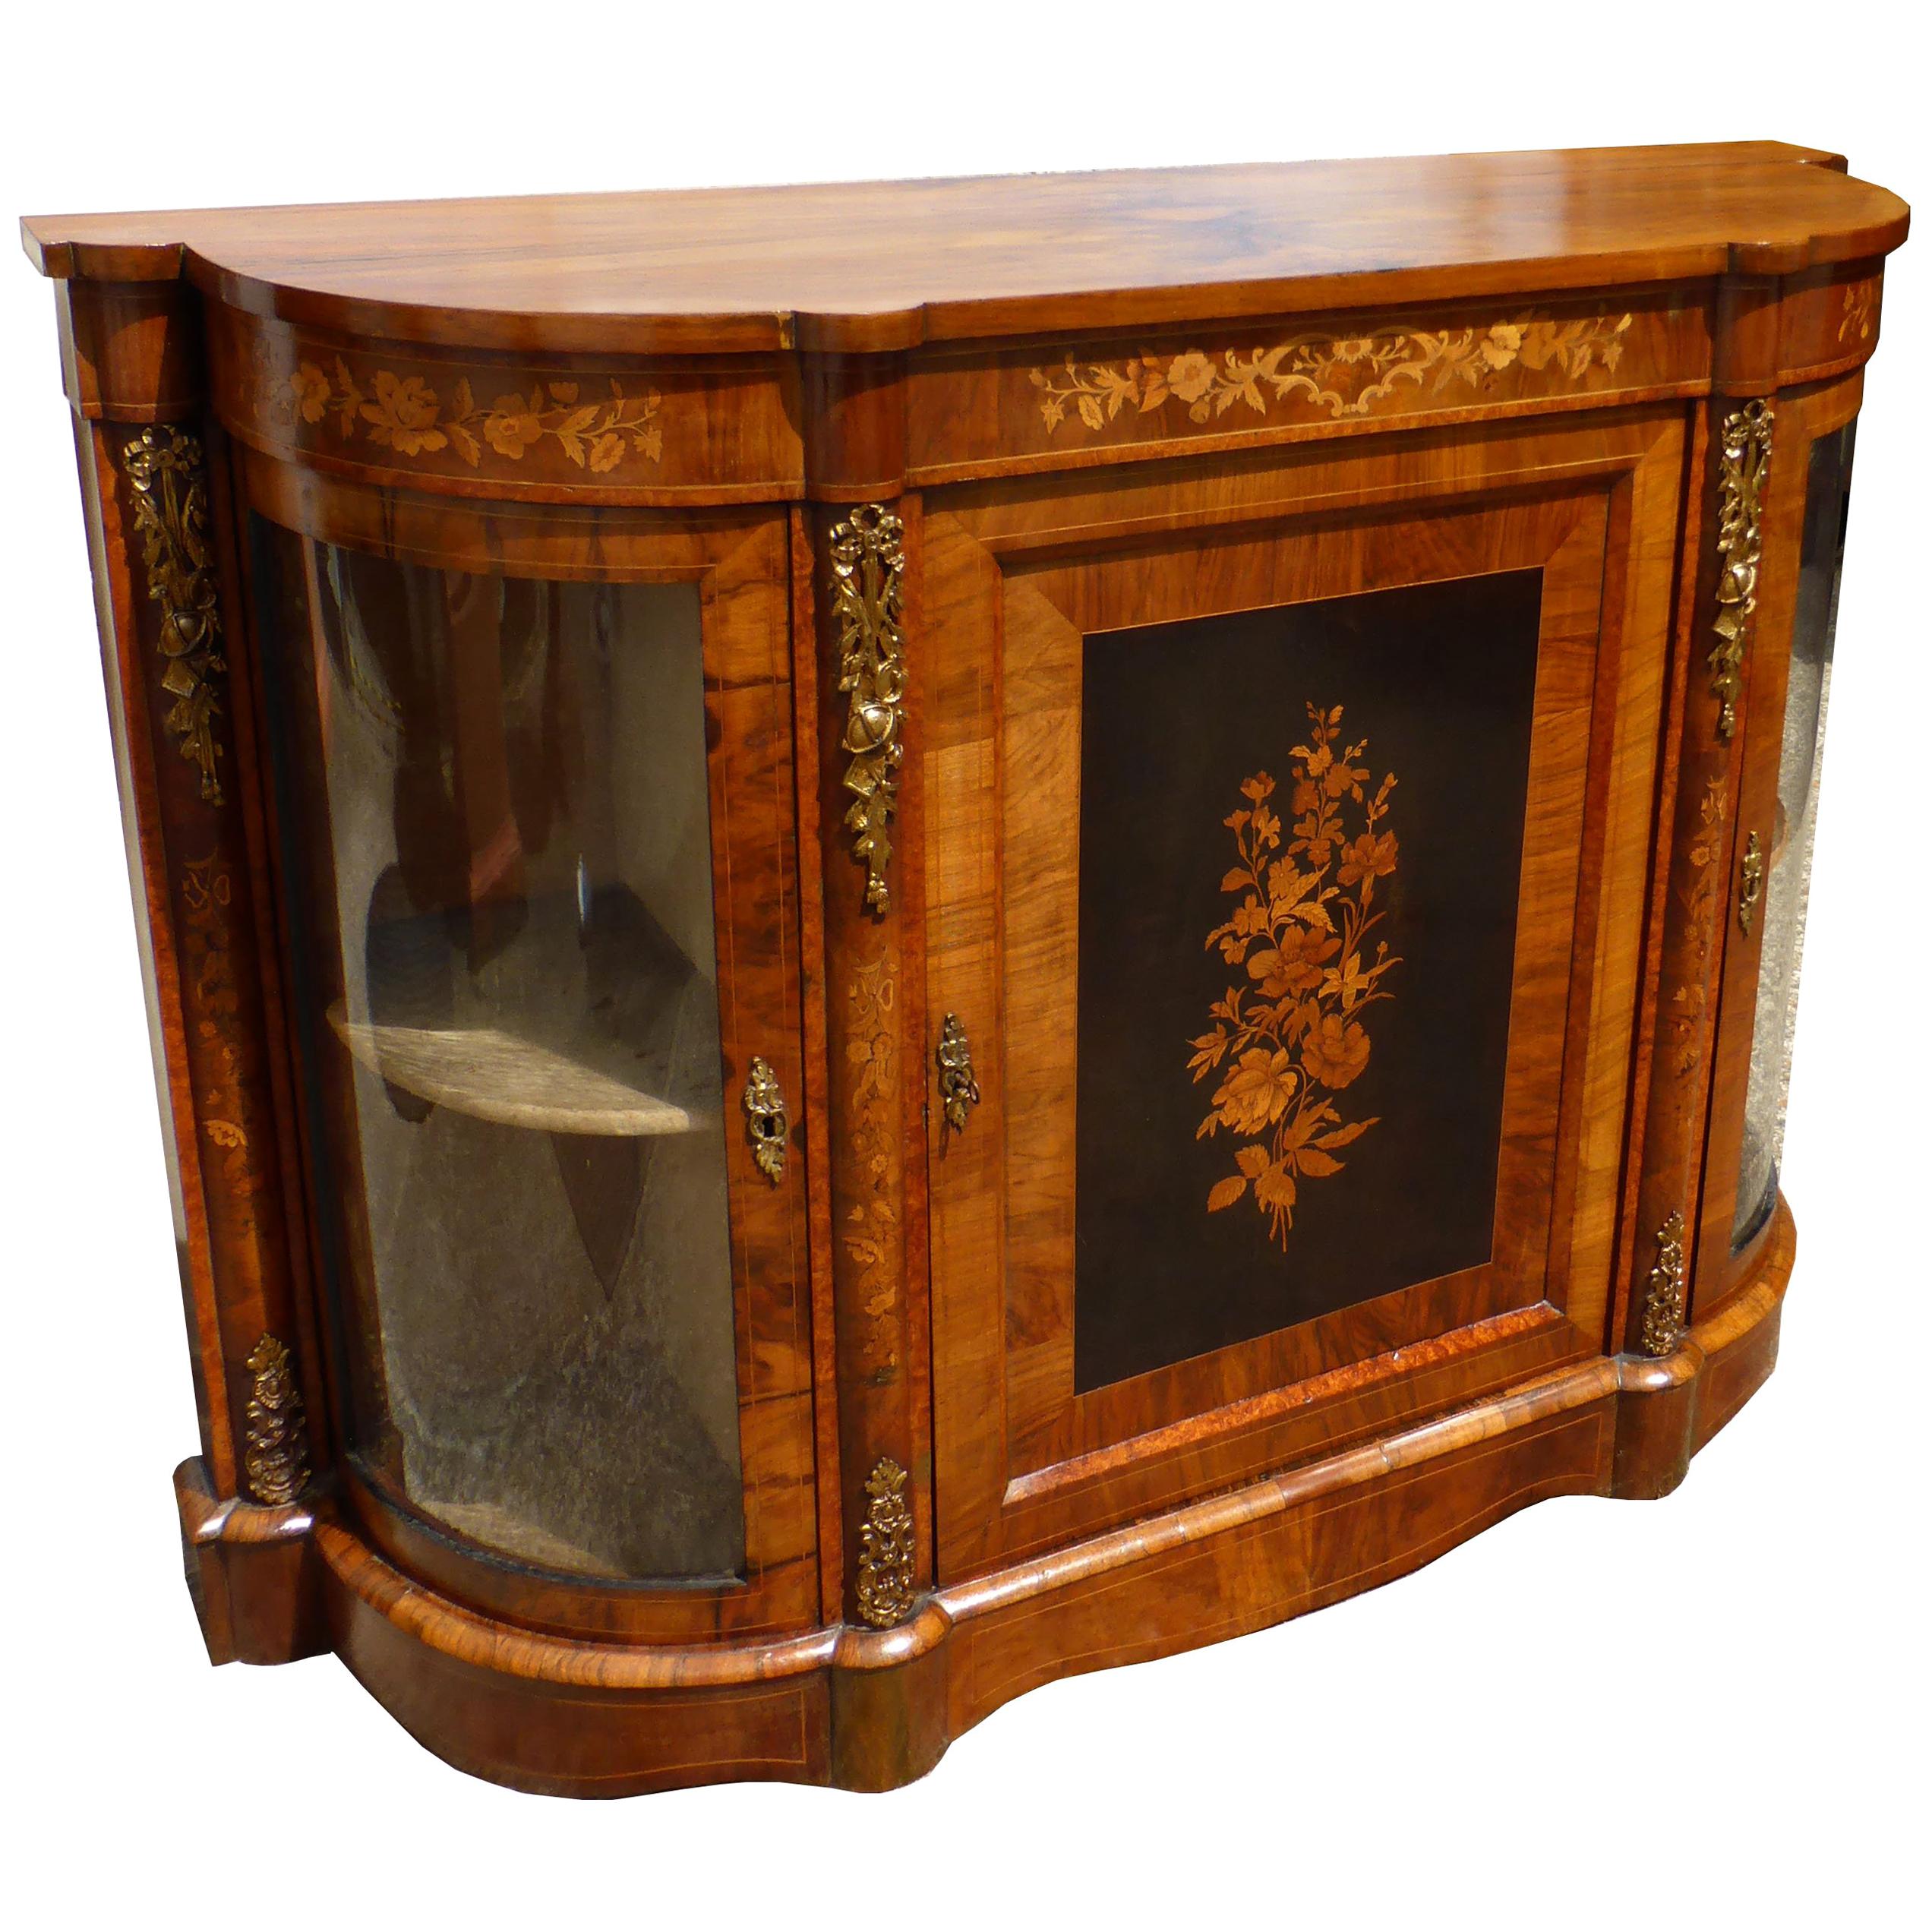 19th Century English Victorian Figured Walnut and Marquetry Credenza For Sale